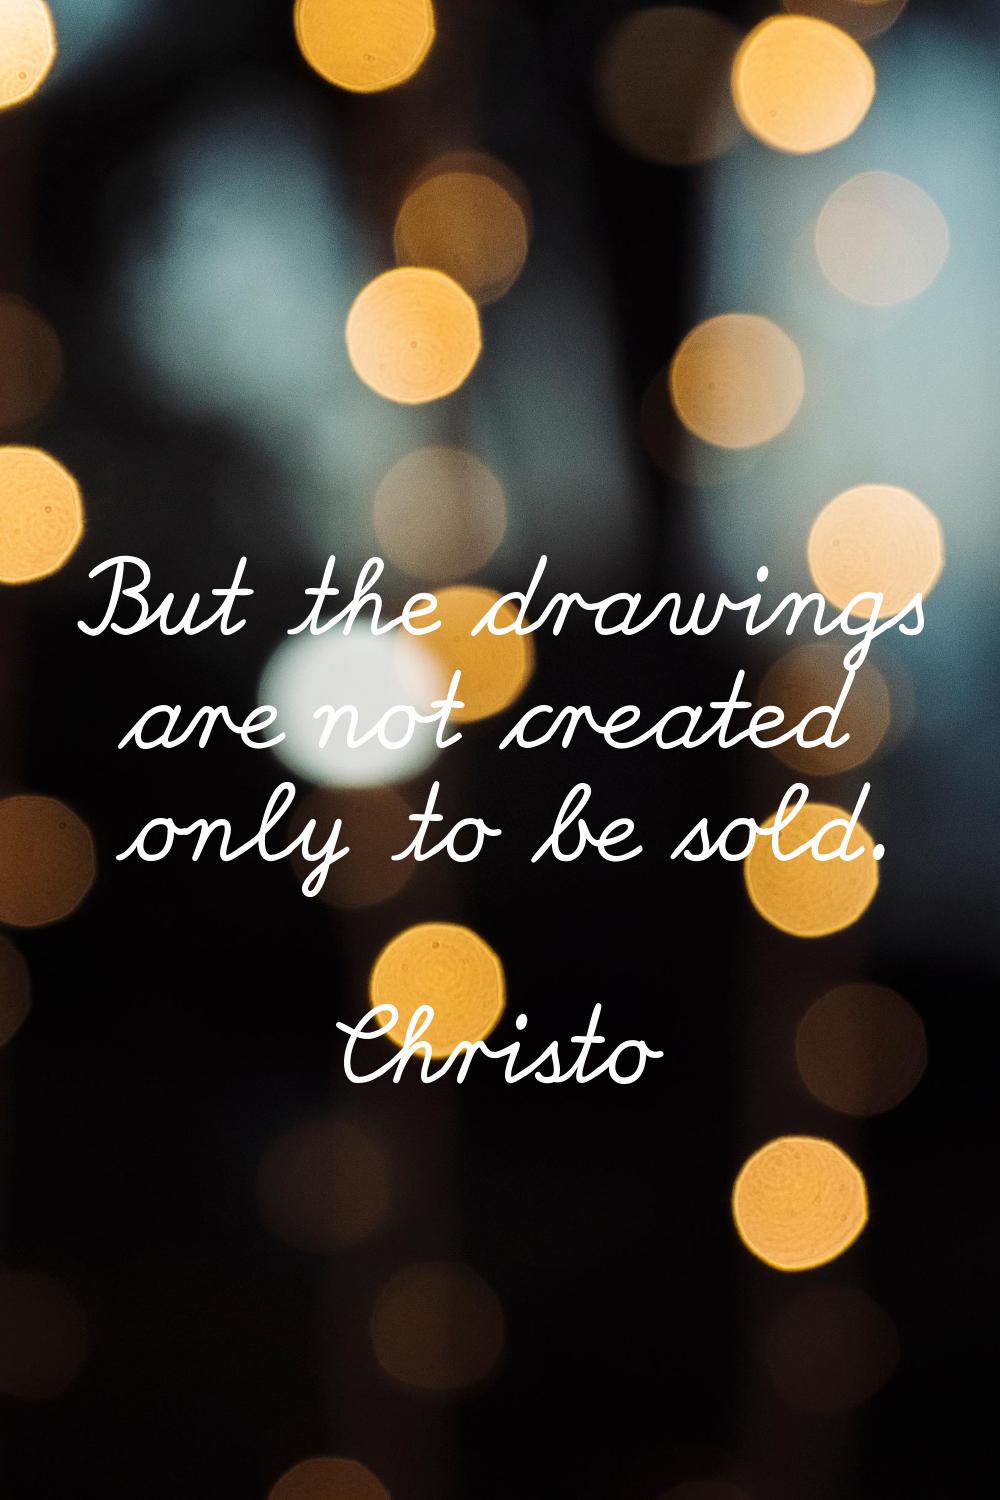 But the drawings are not created only to be sold.